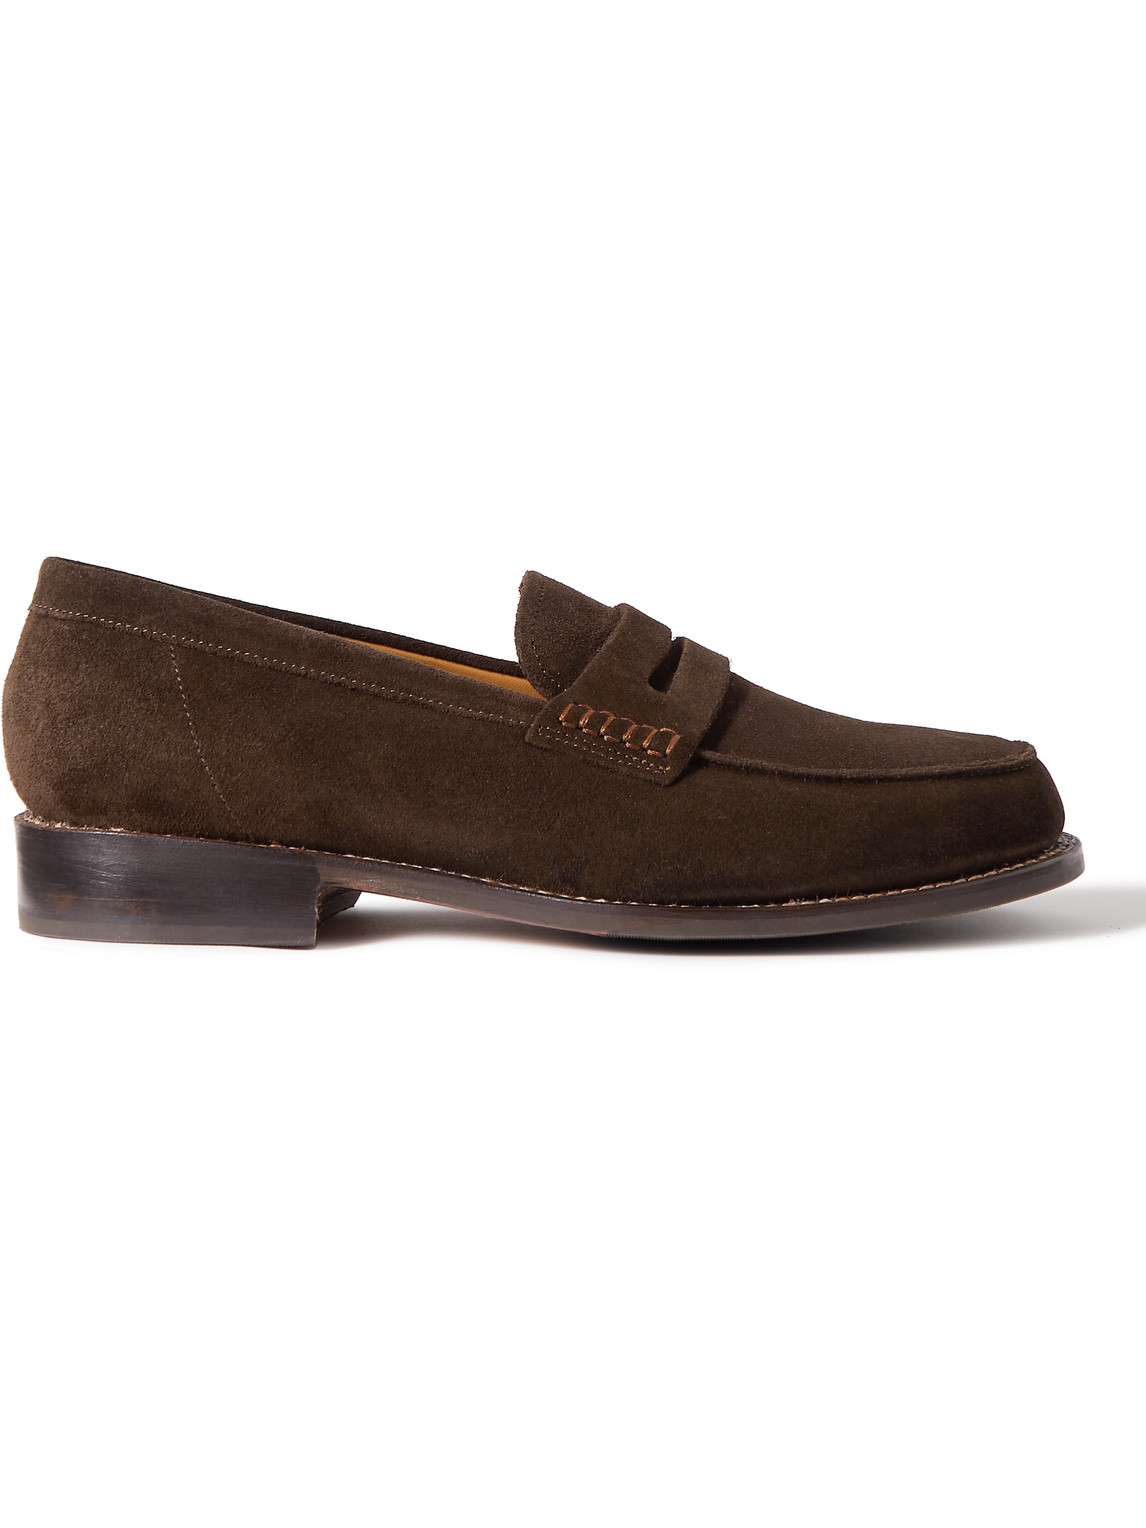 Jago Suede Penny Loafers